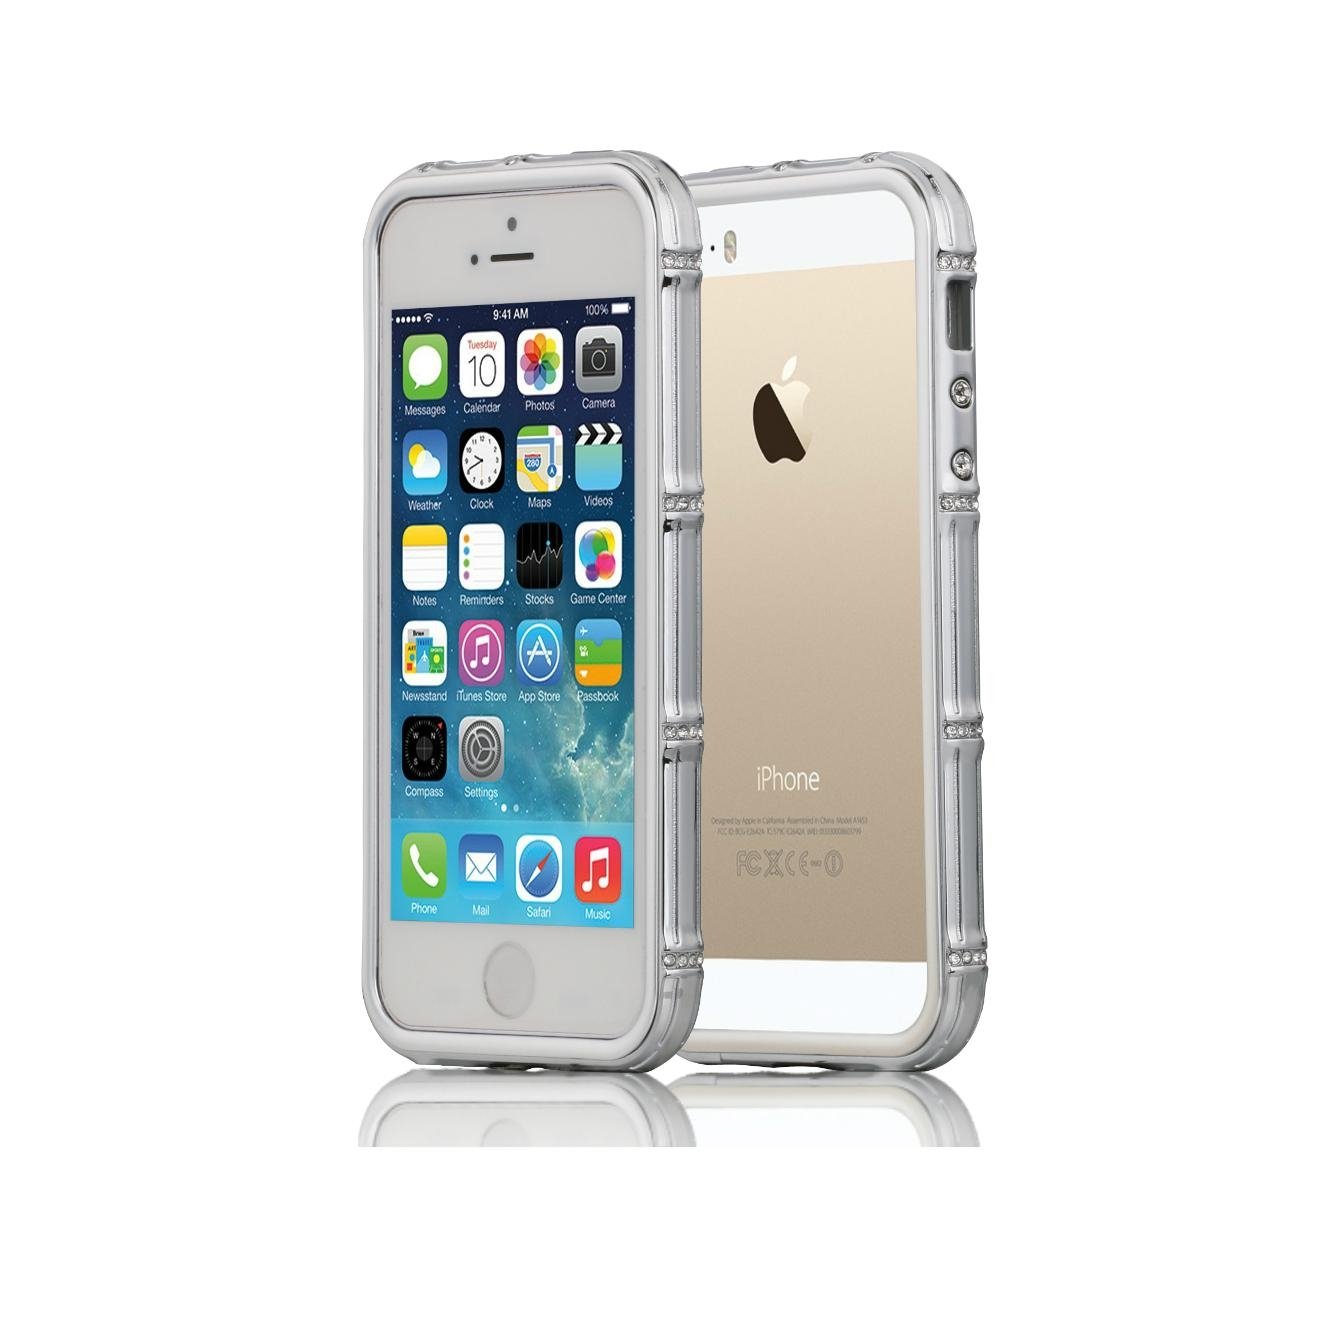 Luxury Jewelry Style with Crystal Inlaid Metal Bumpers for iPhone 5/5S 3